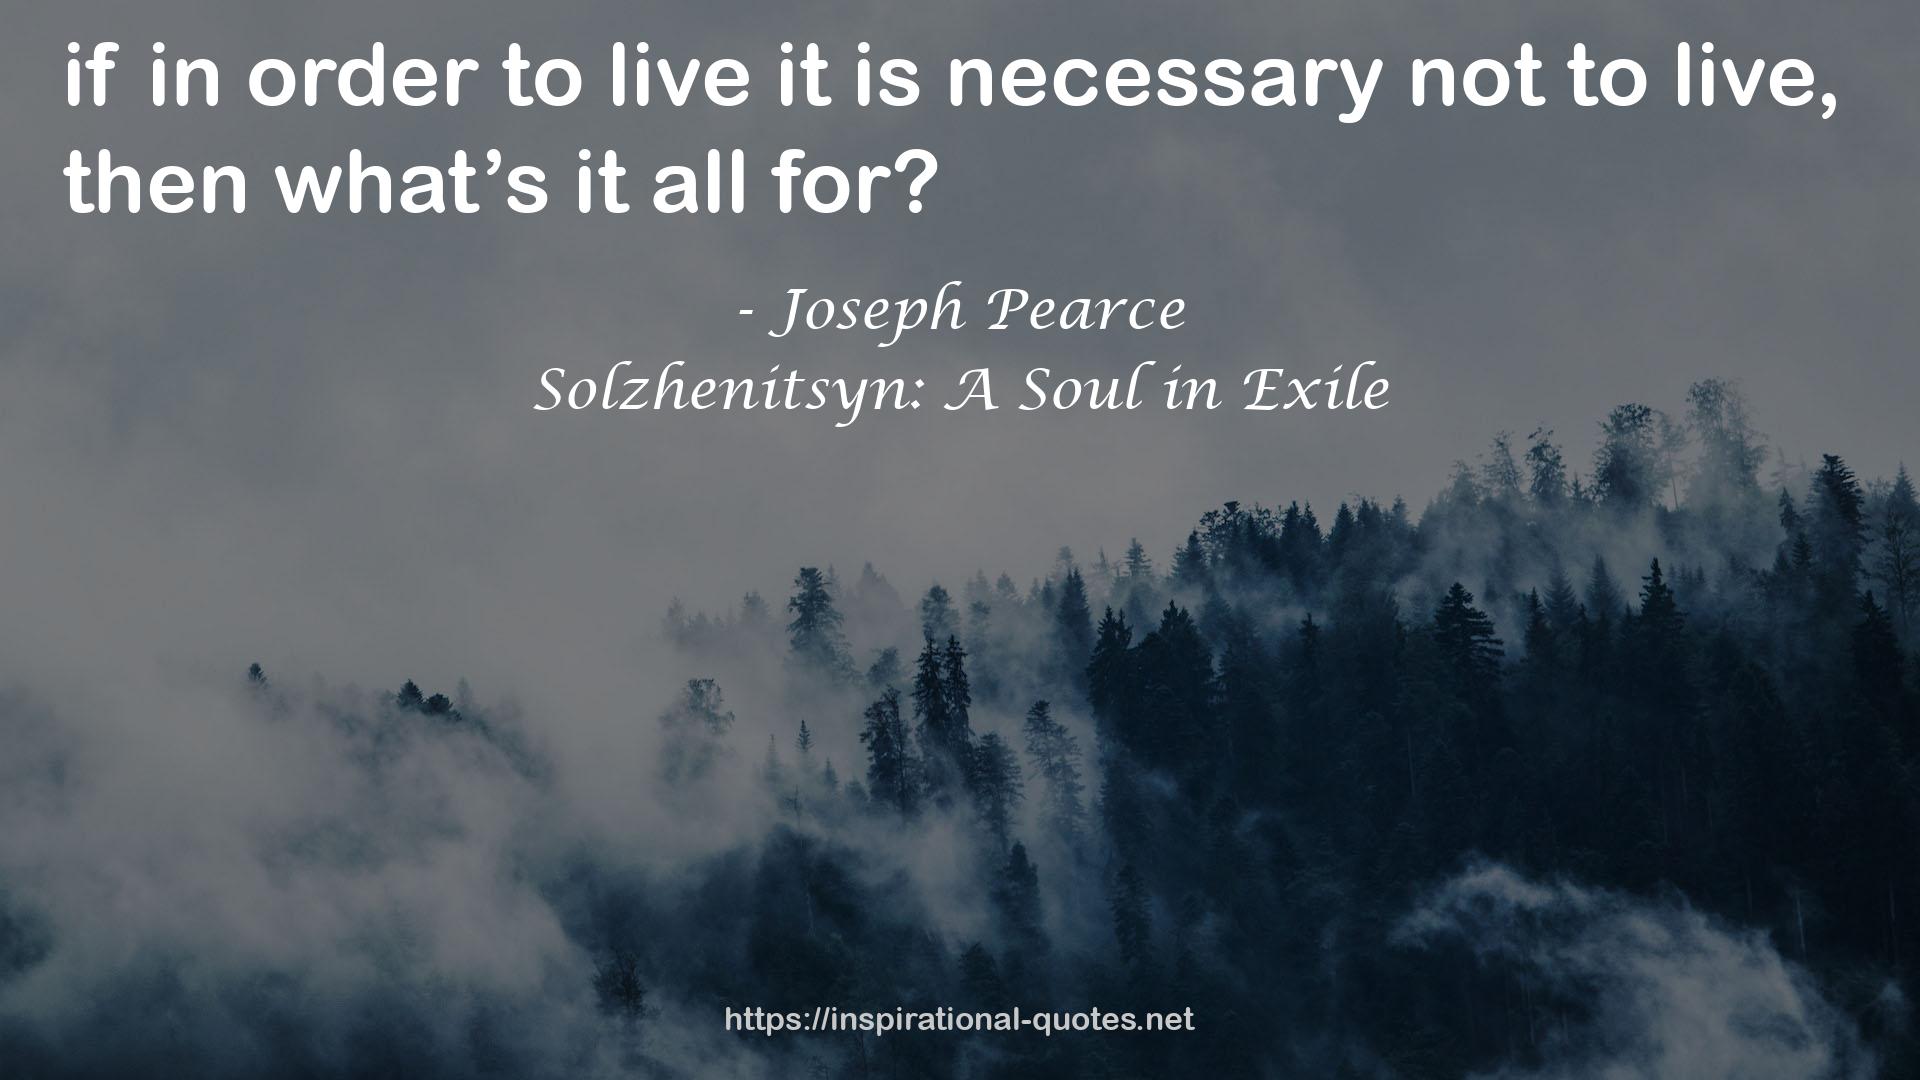 Solzhenitsyn: A Soul in Exile QUOTES